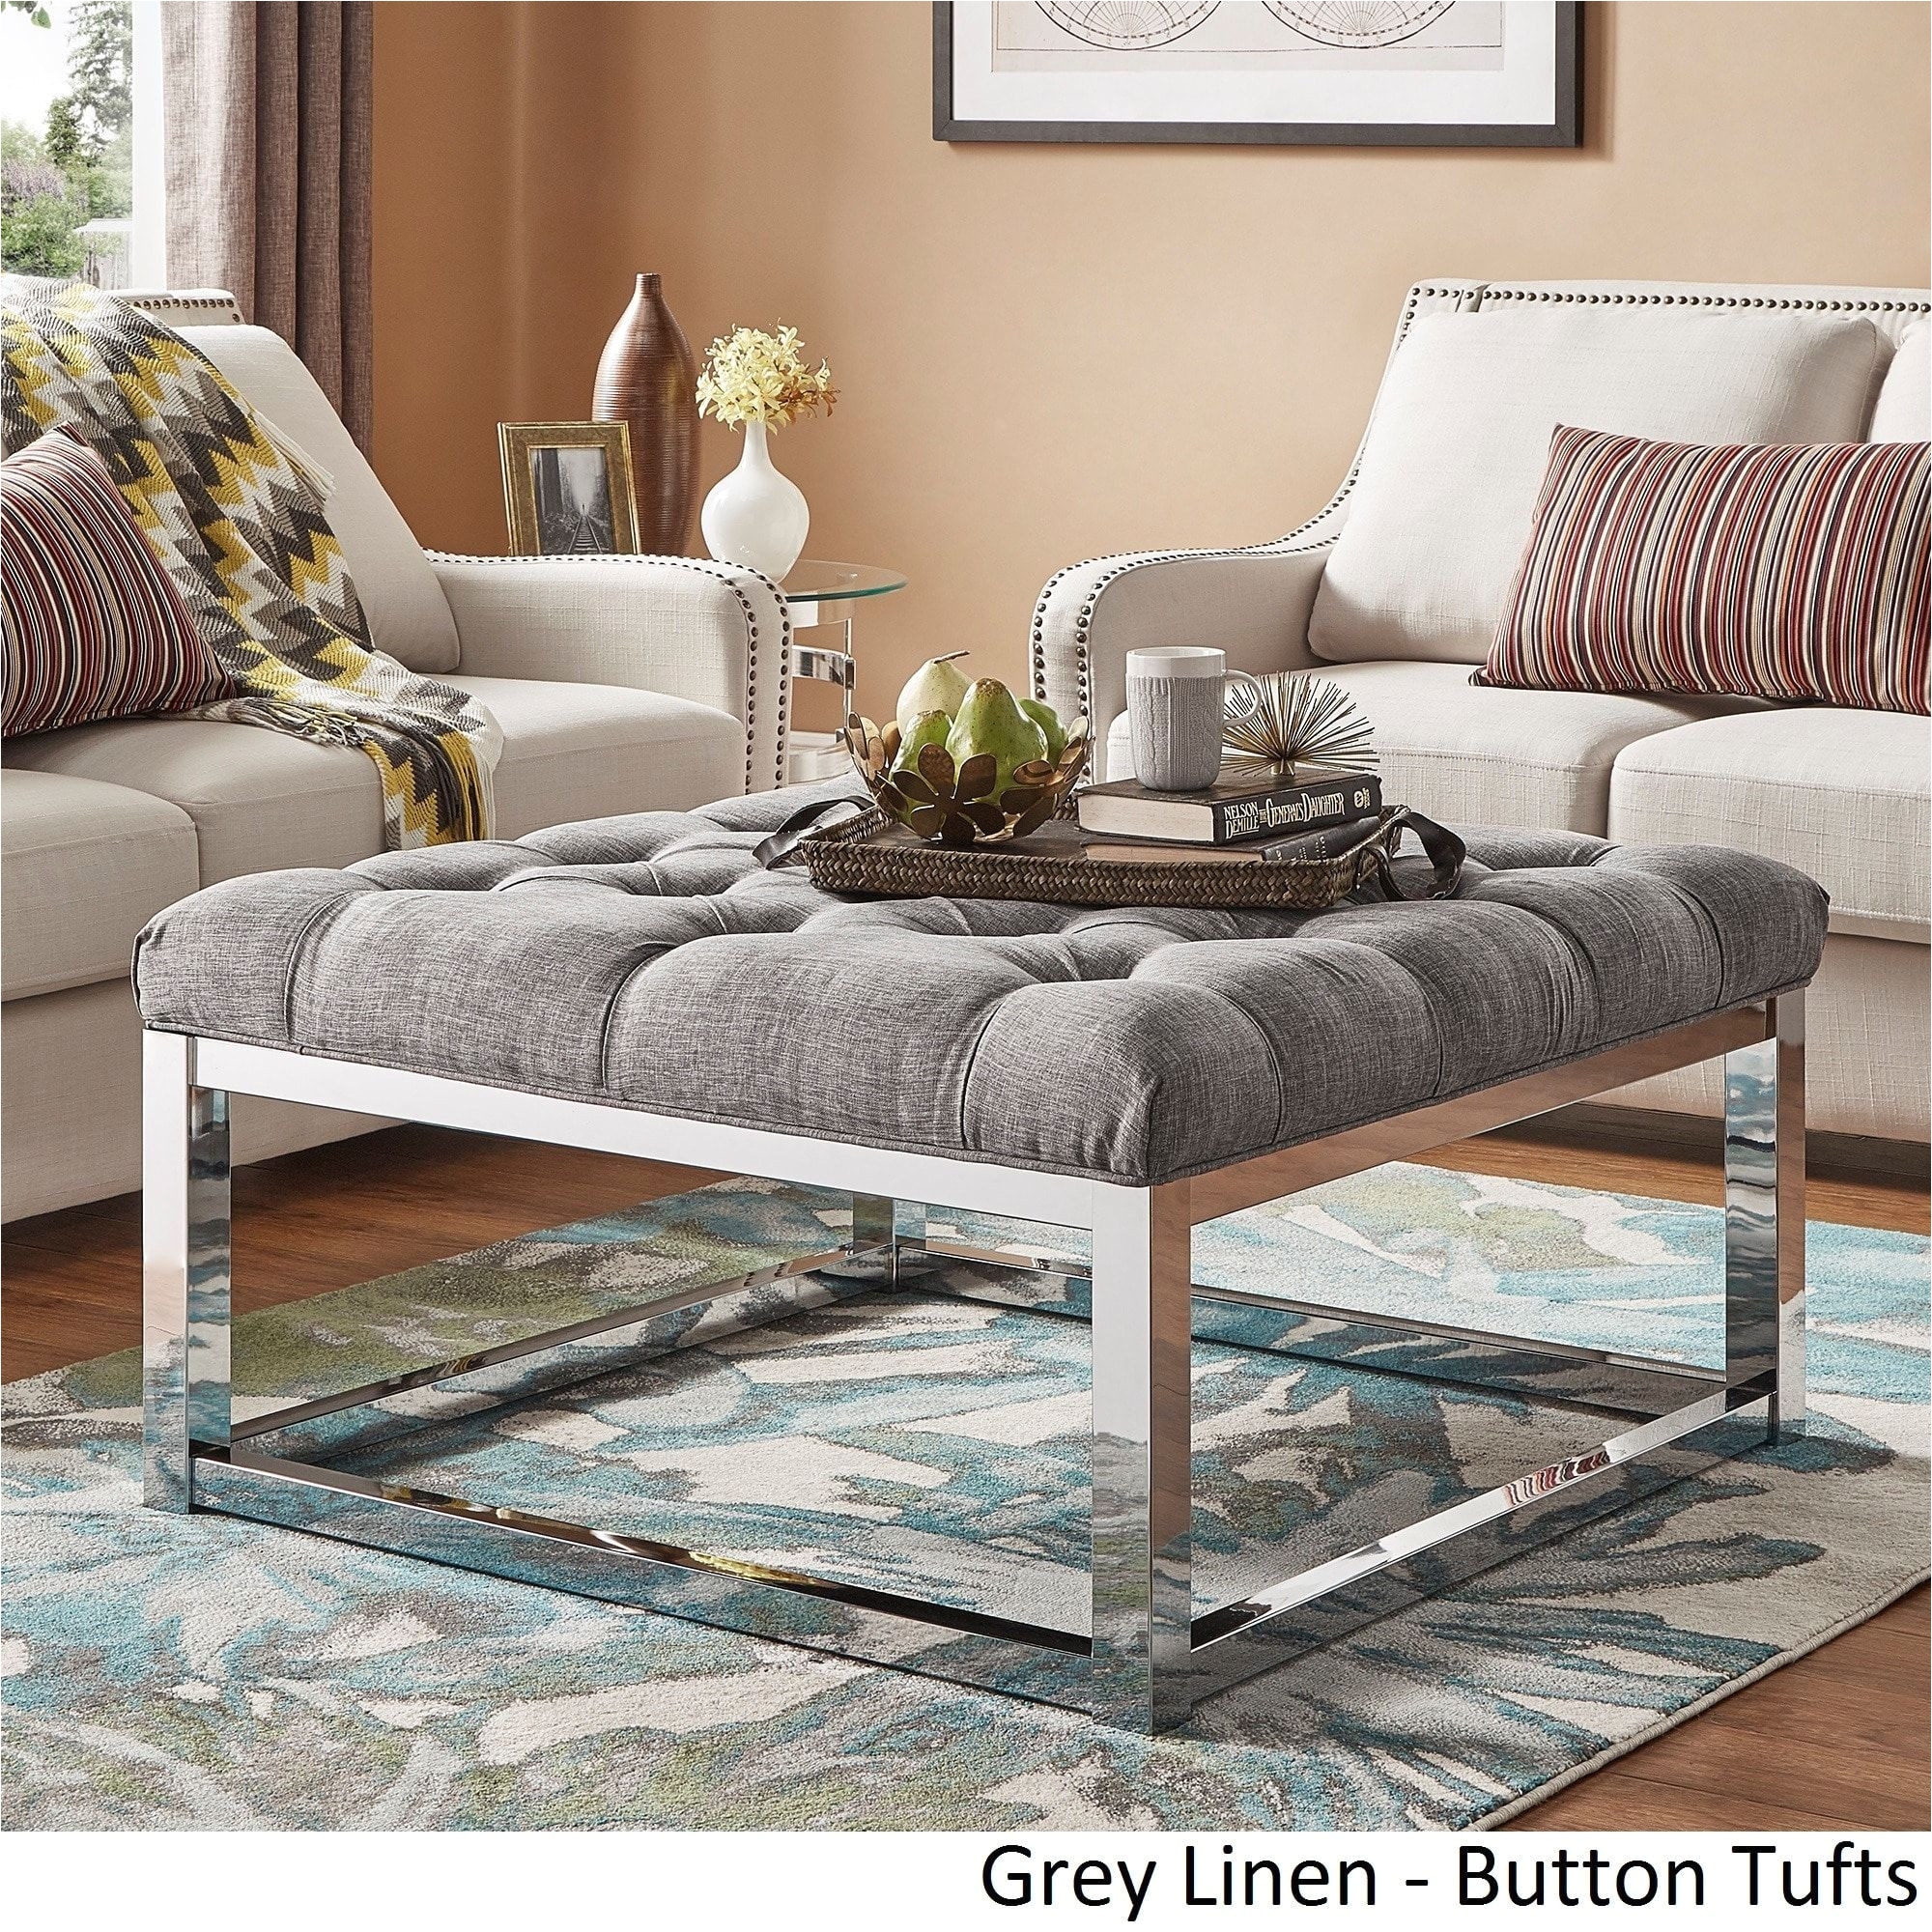 Living Room Coffee Table Elegant solene Square Base Ottoman Coffee Table Chrome Grey by Inspire